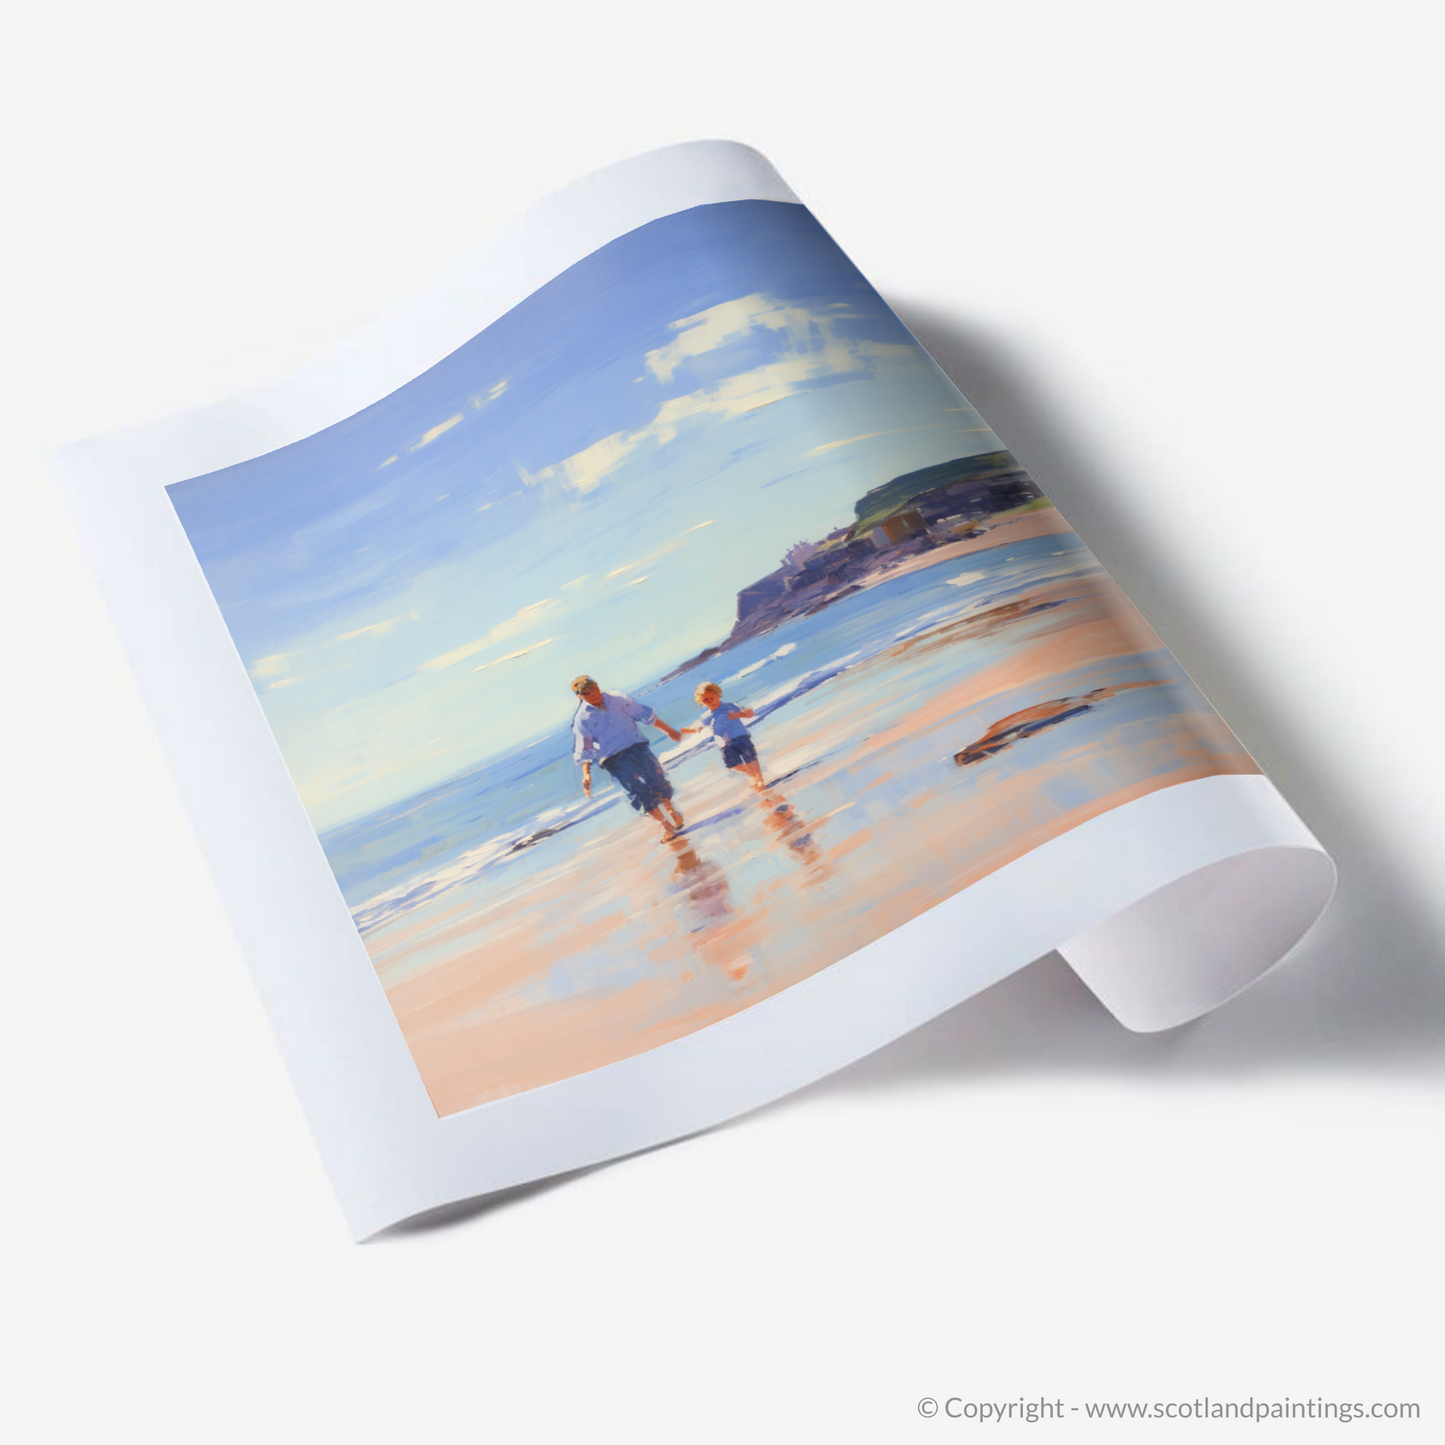 Art Print of A dad and son walking on Coldingham Bay